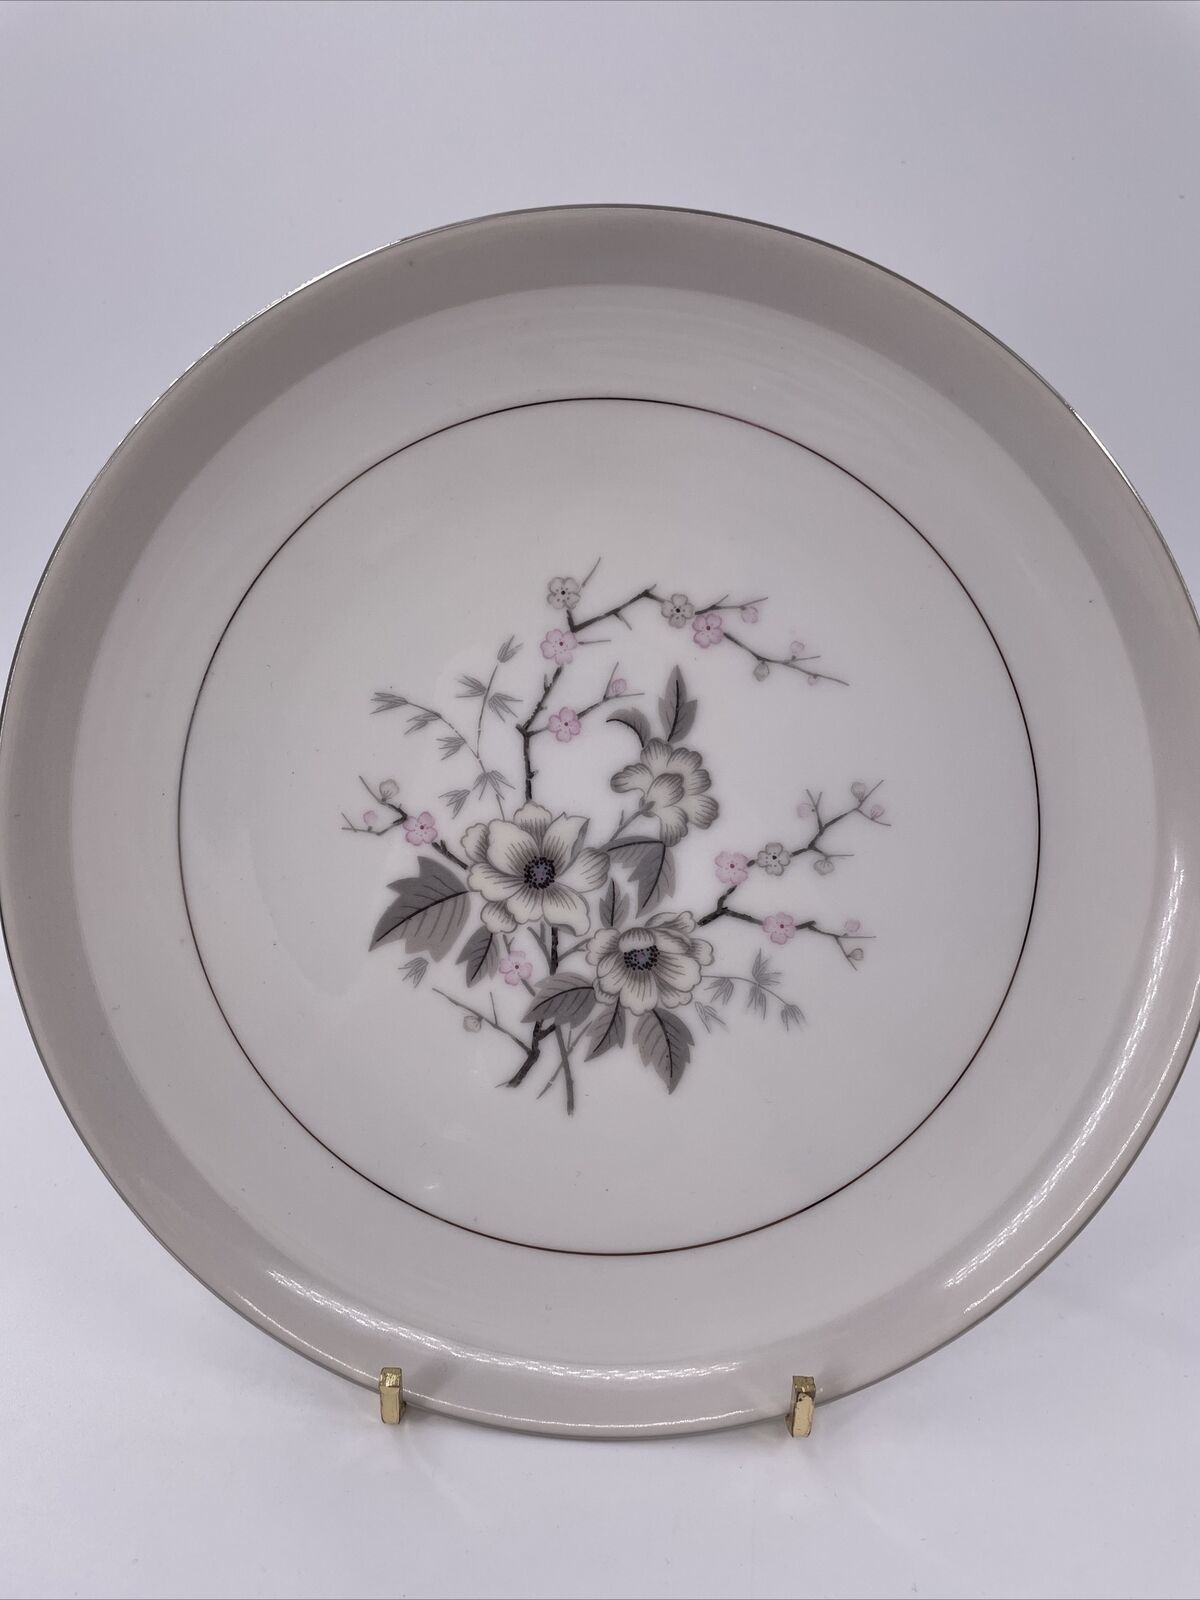 Primary image for Harmony House China Nannette Pattern 7 5/8" Salad Plate Pink & White Flowers